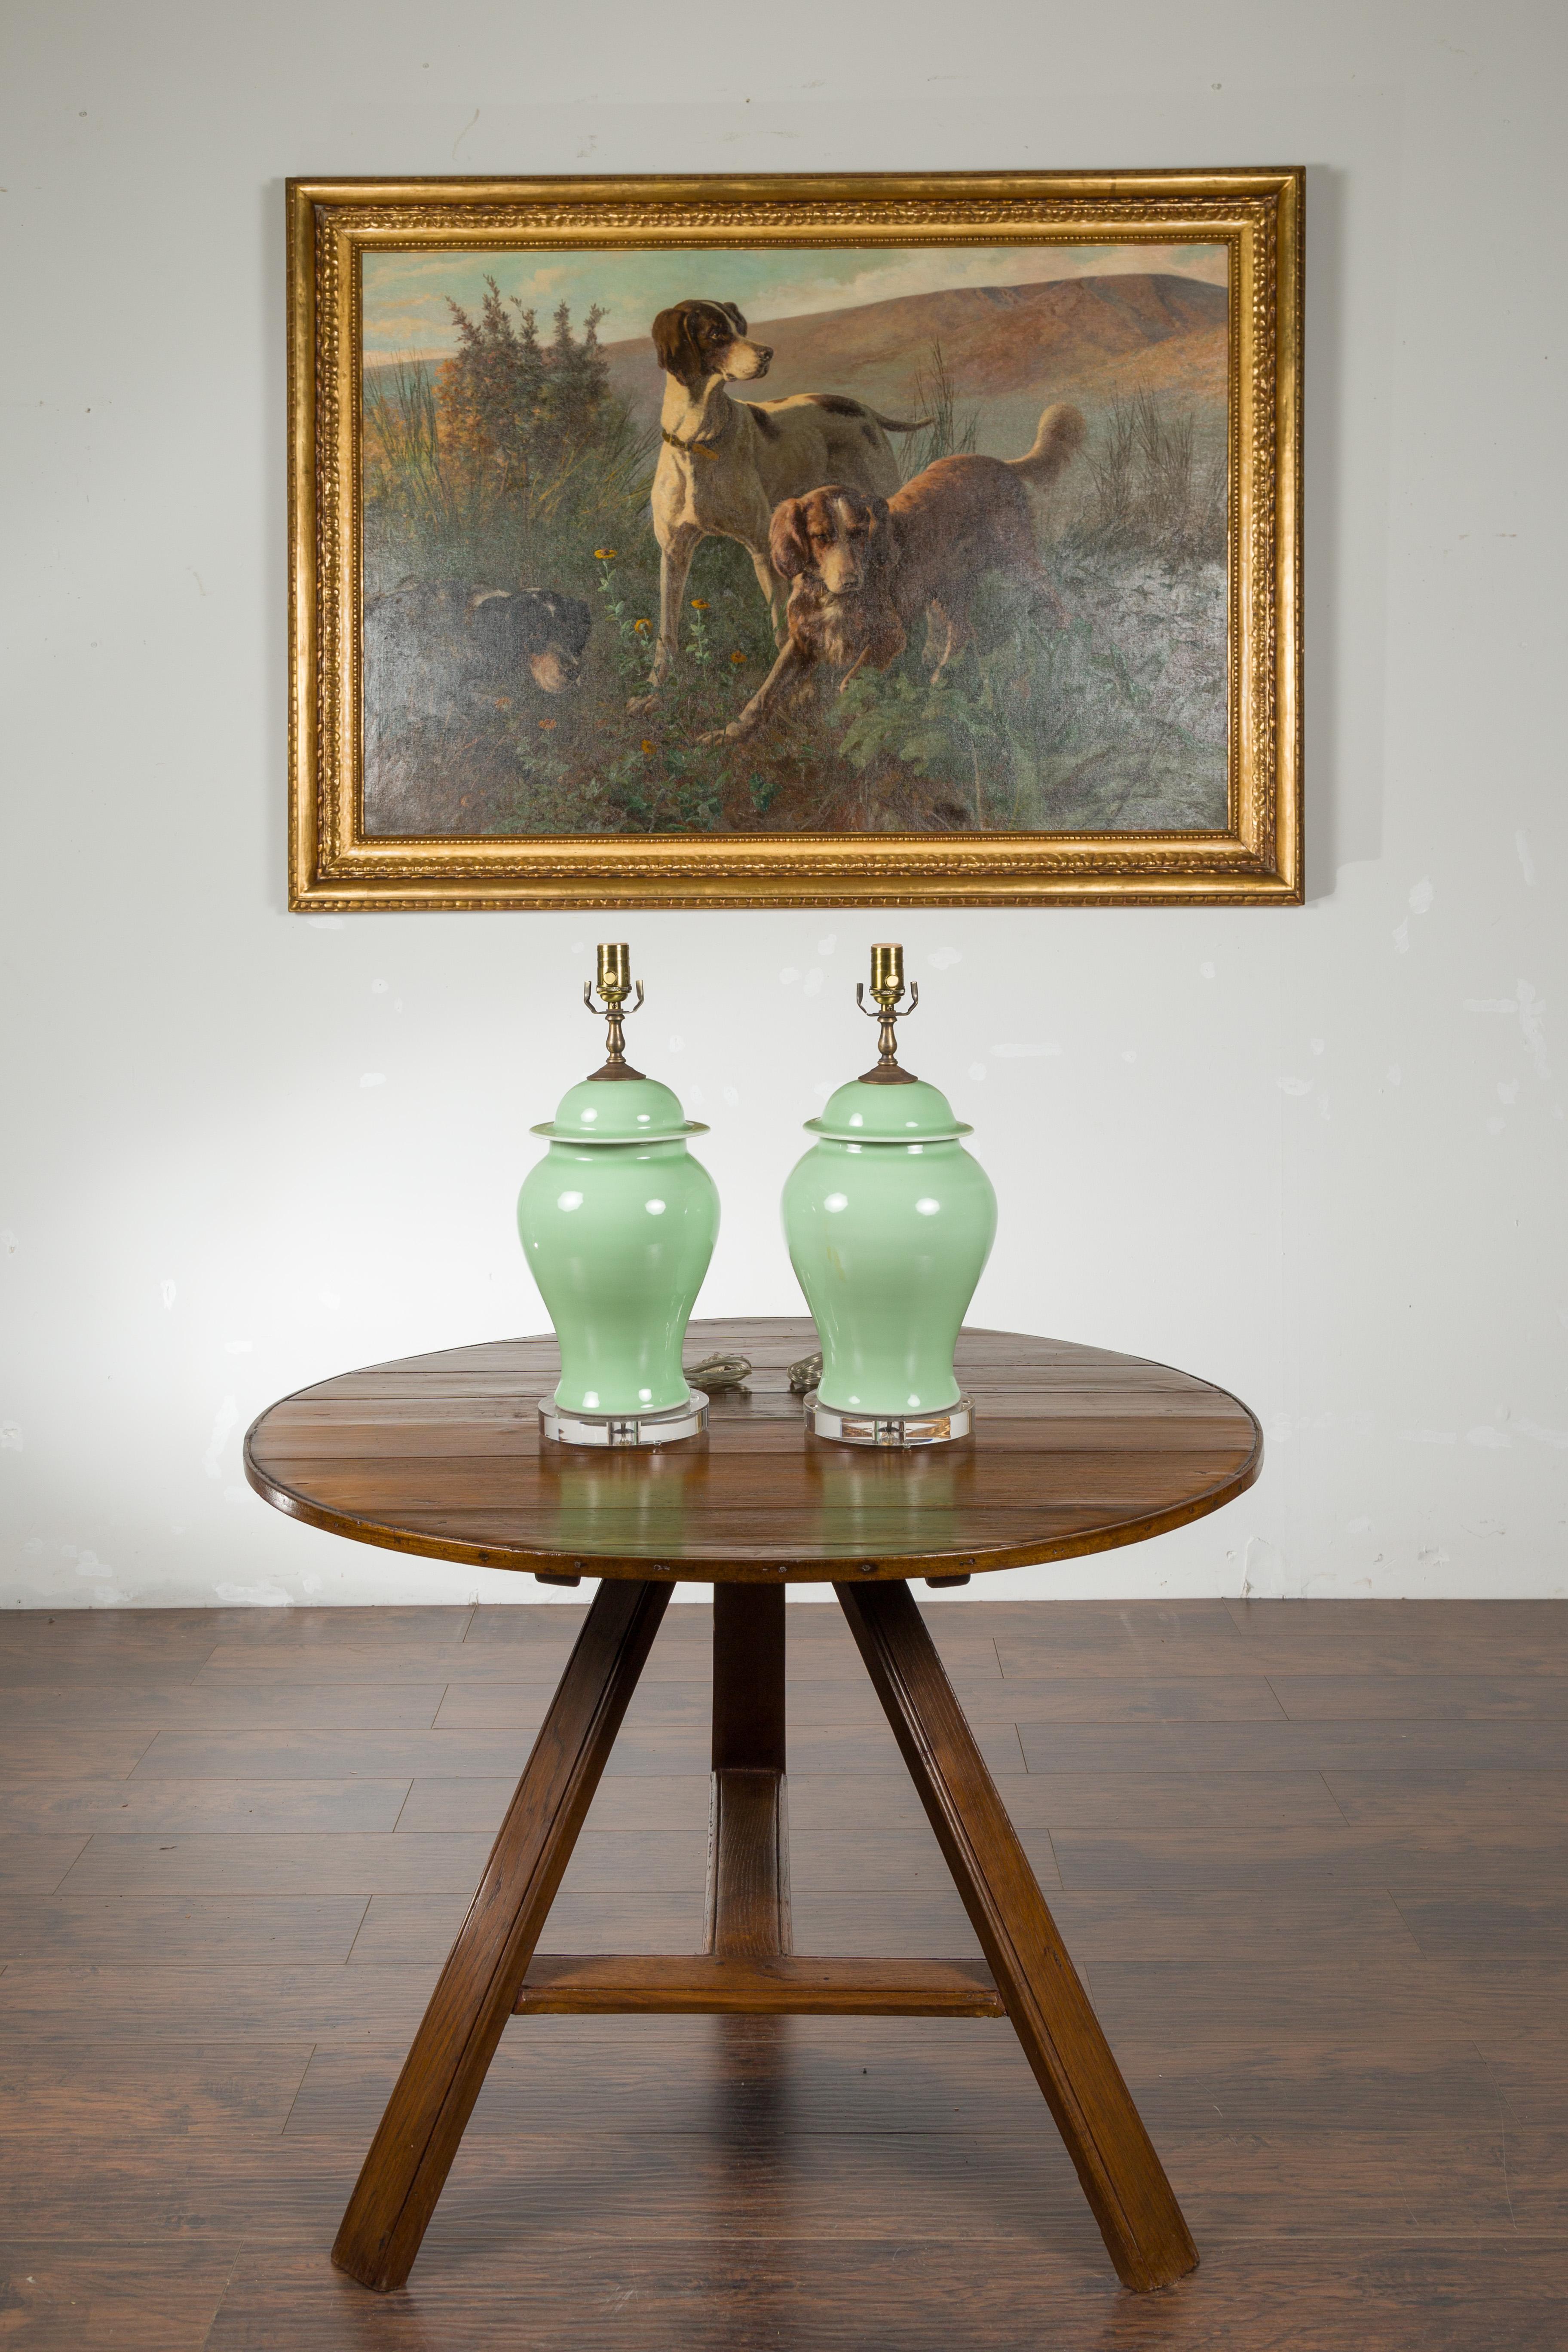 A pair of green porcelain lidded jar table lamps with lucite bases. Each of this pair of porcelain table lamps attracts our attention with its sleek lines and soft green color. Mounted on circular lucite bases and wired for the US, this pair of